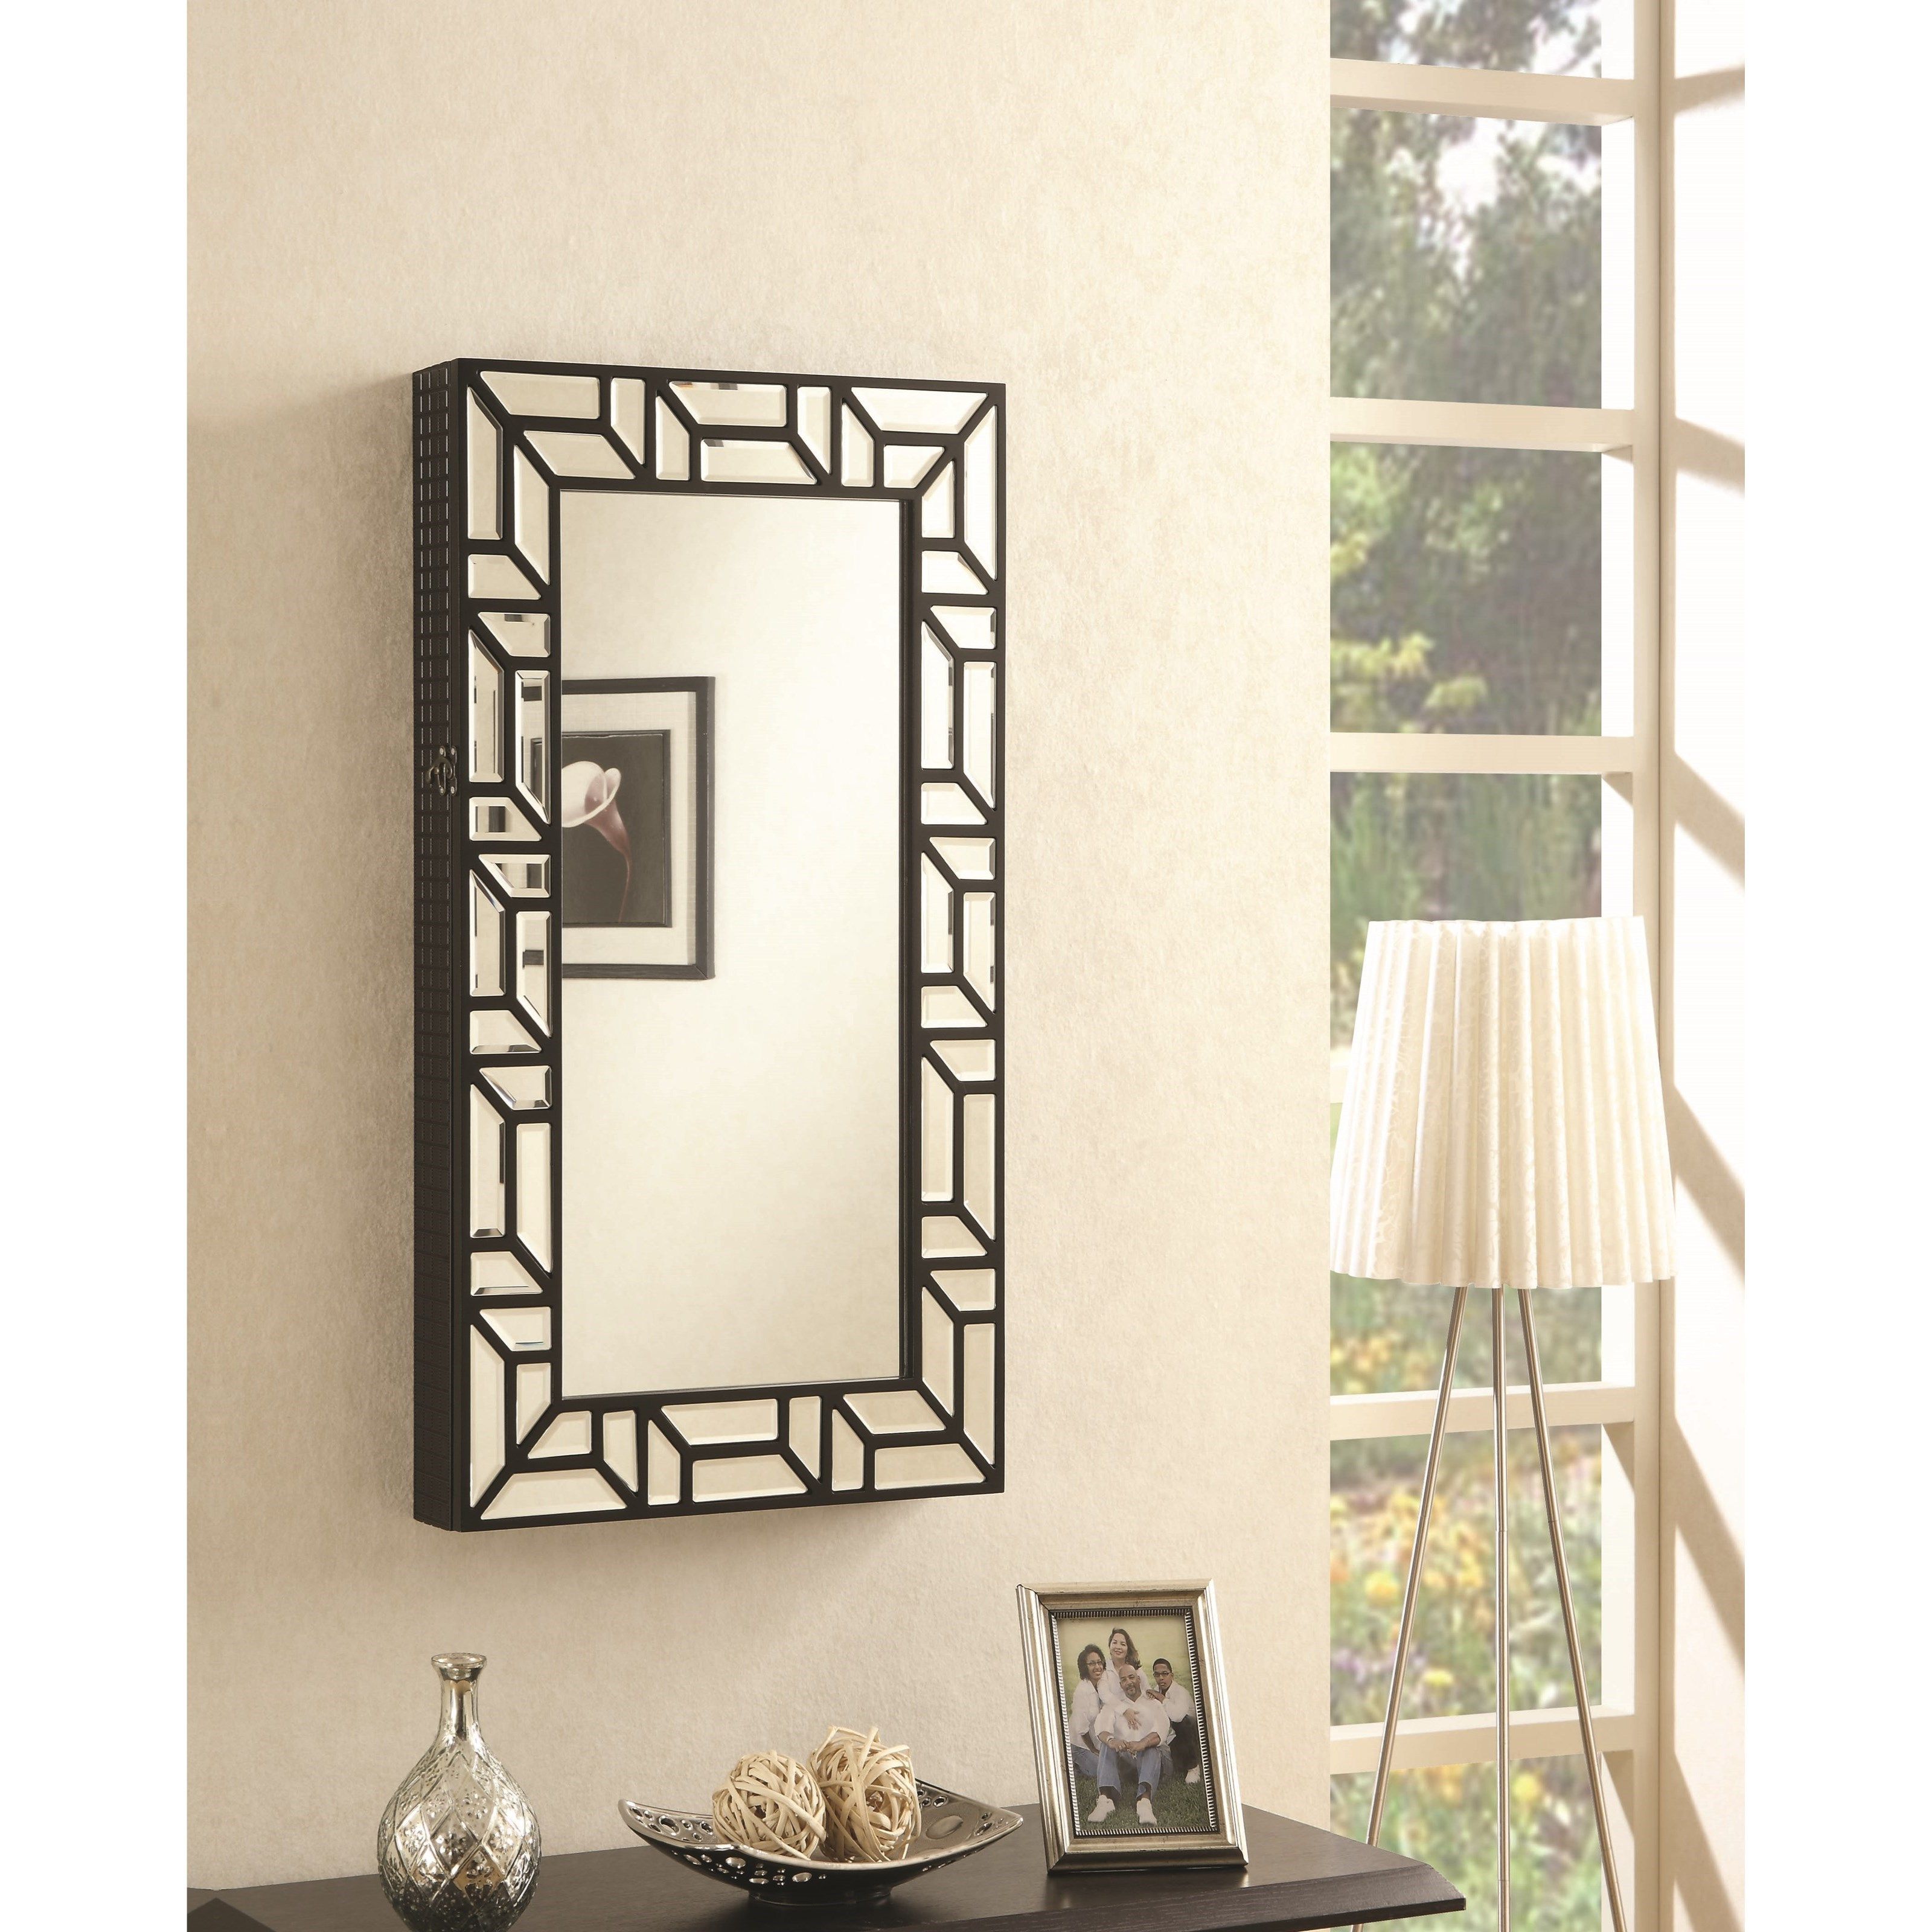 Accent Mirrors With Regard To Current Accent Mirrors Wall Mounted Jewelry Armoire (View 5 of 20)